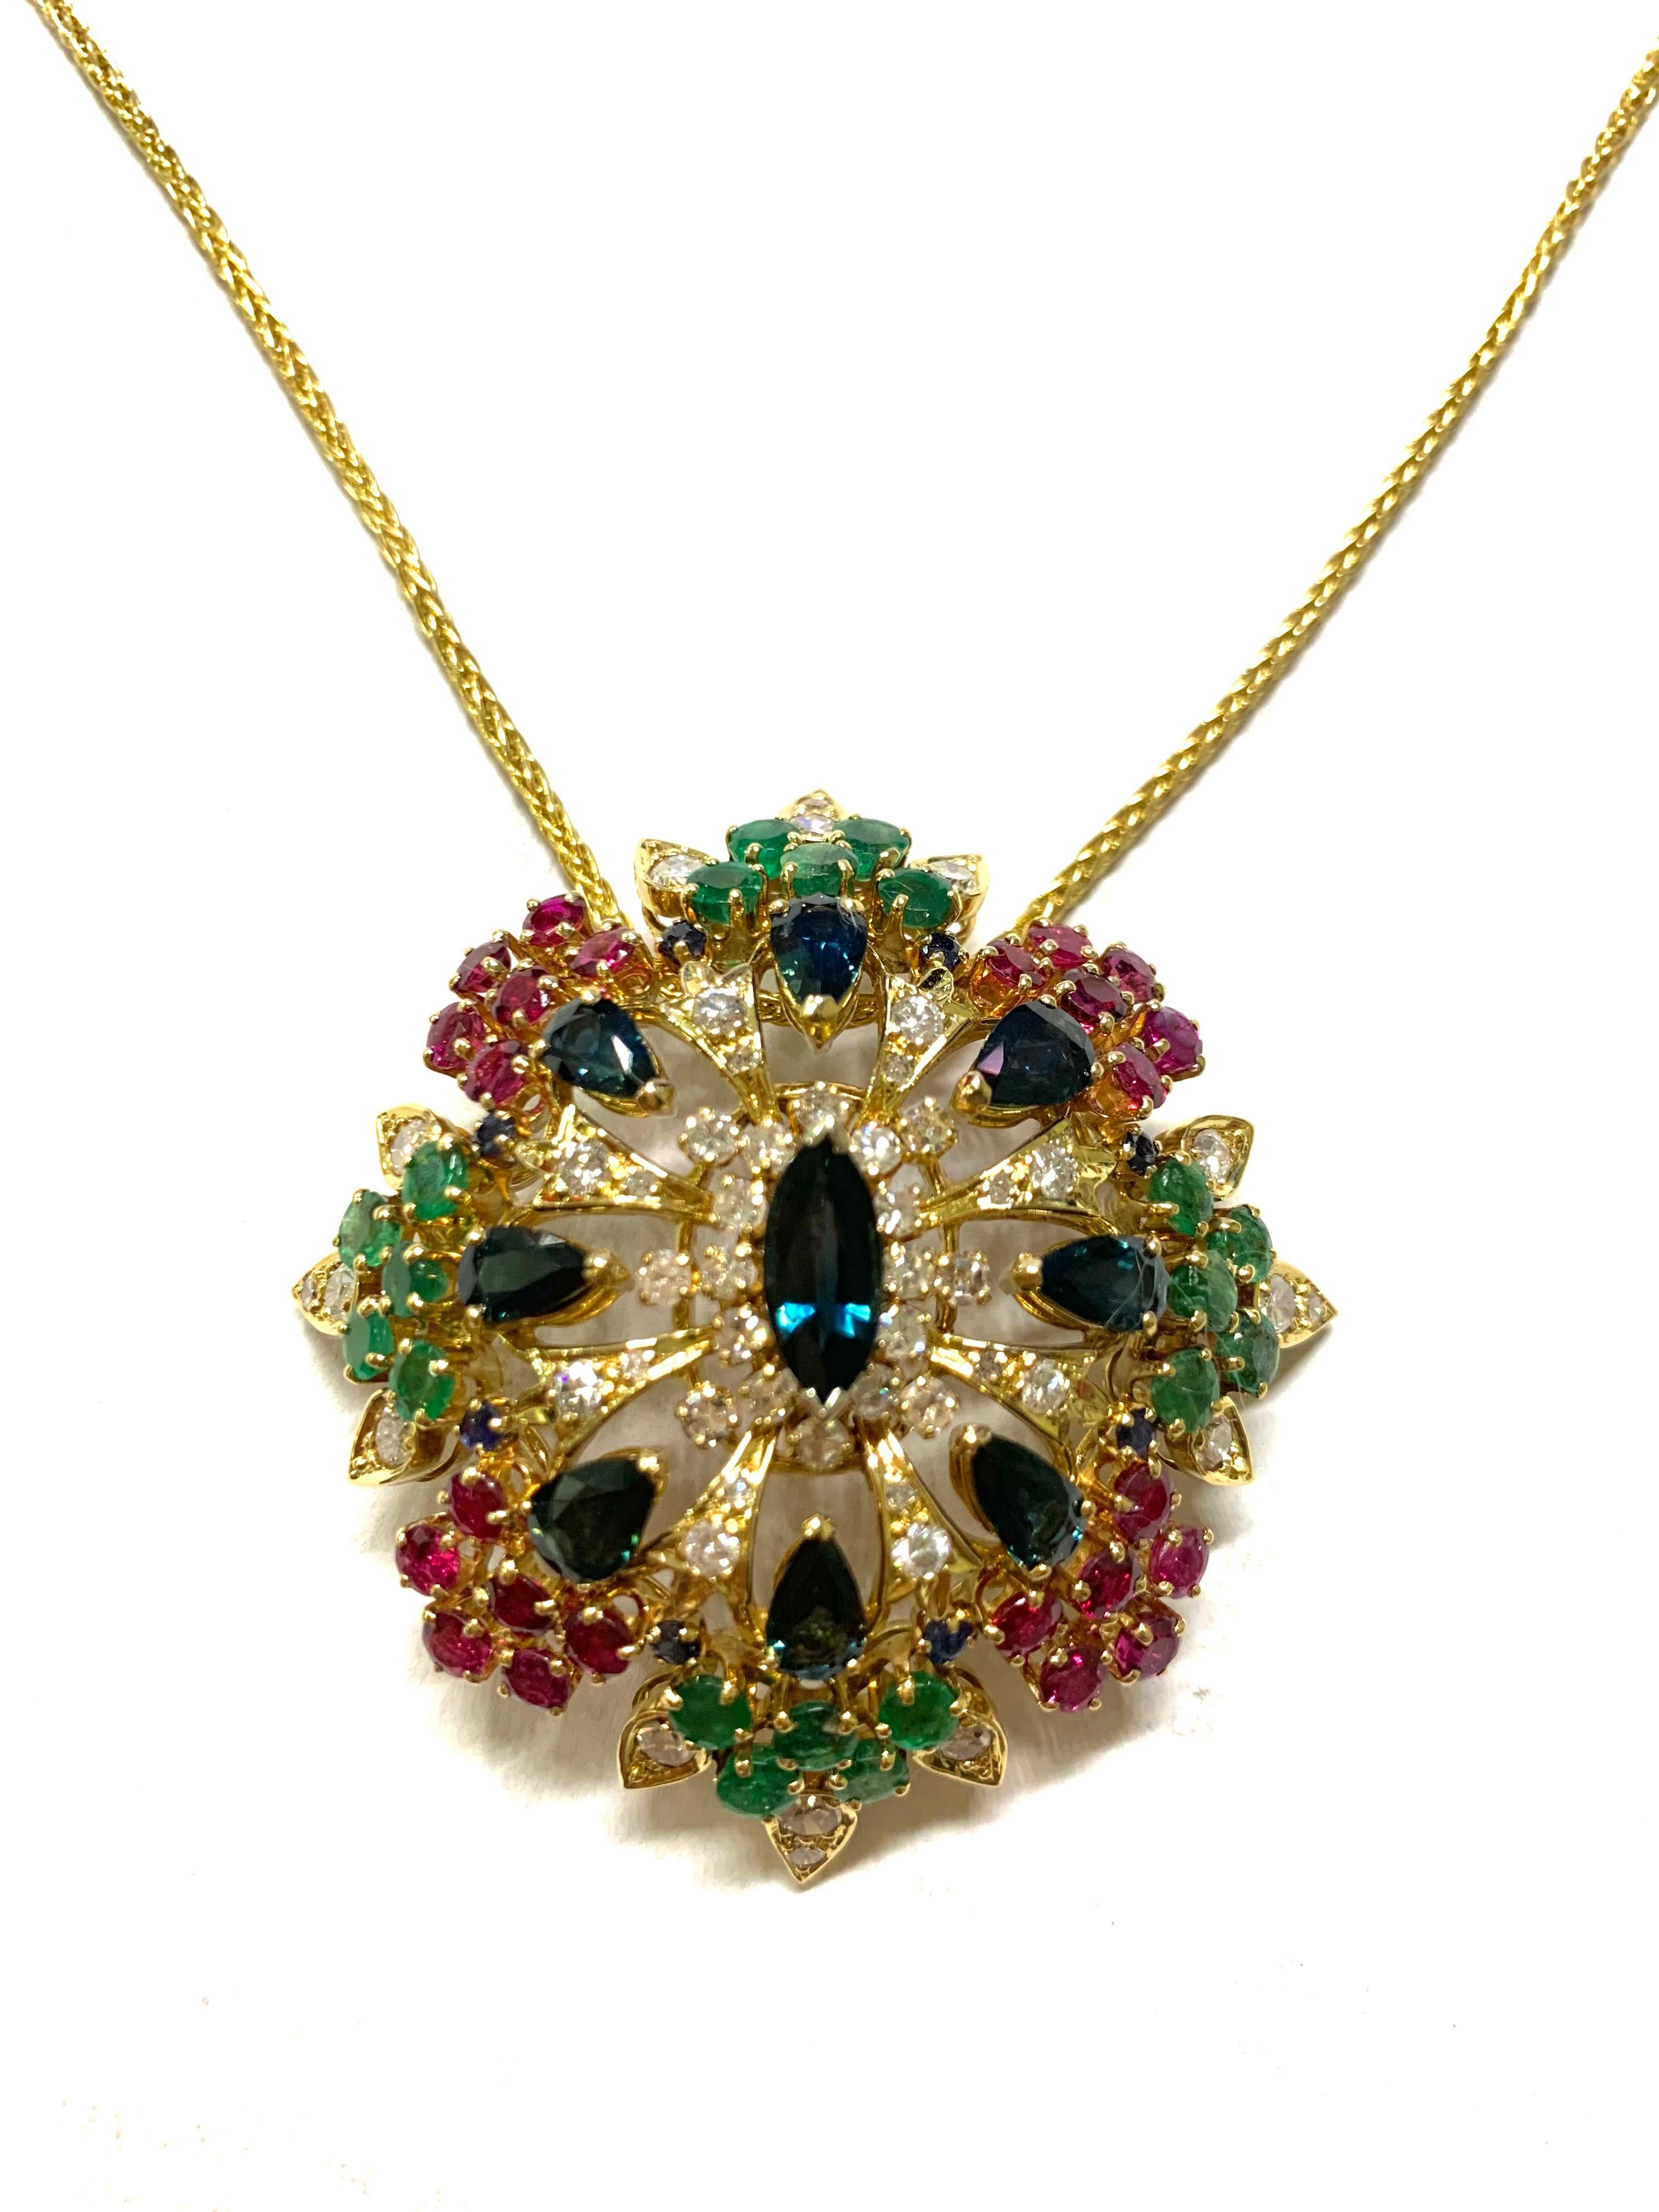 Marquise Cut Domed 10 Carat Sapphire Diamond Emerald and Ruby Necklace Pendant For Sale